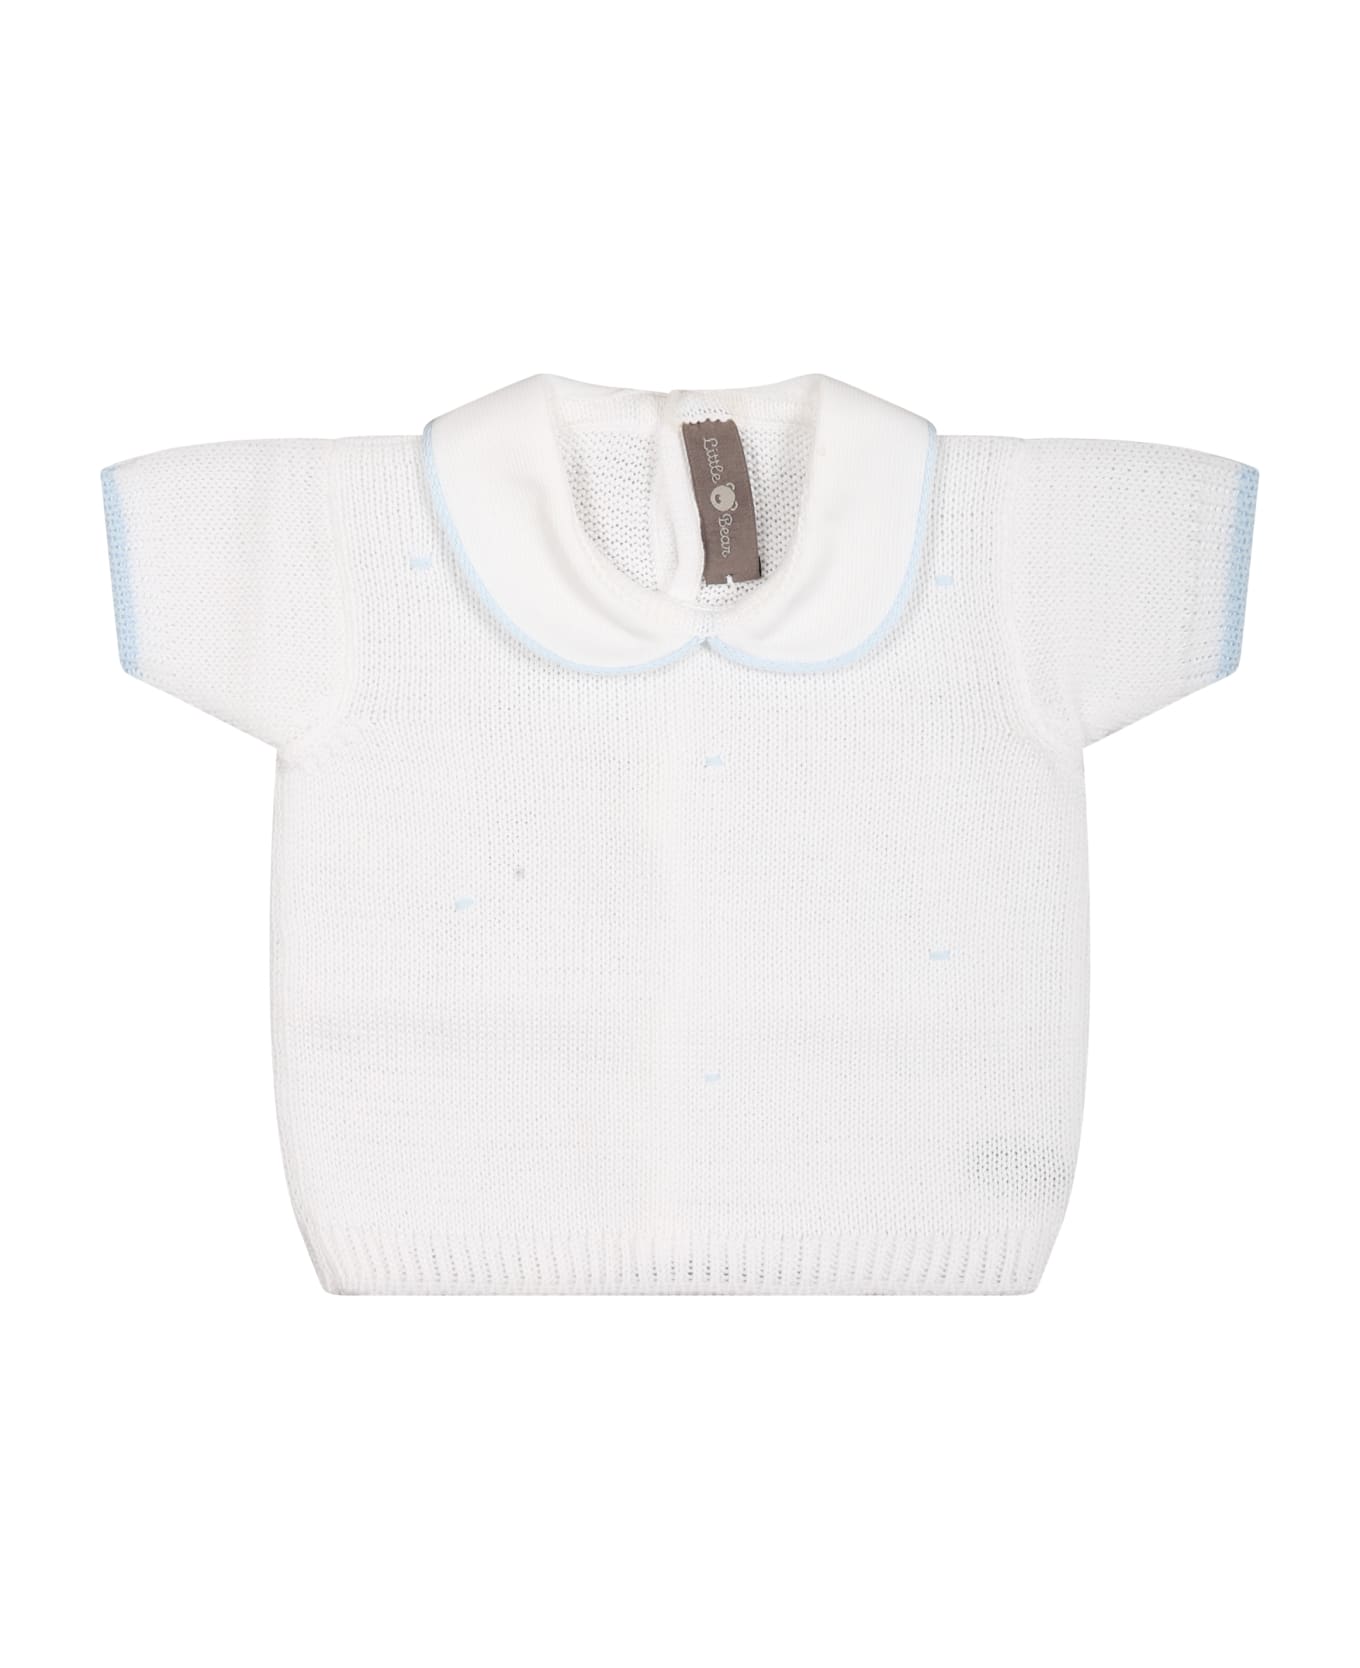 Little Bear White Sweater For Baby Boy With Light Blue Polka Dots - White